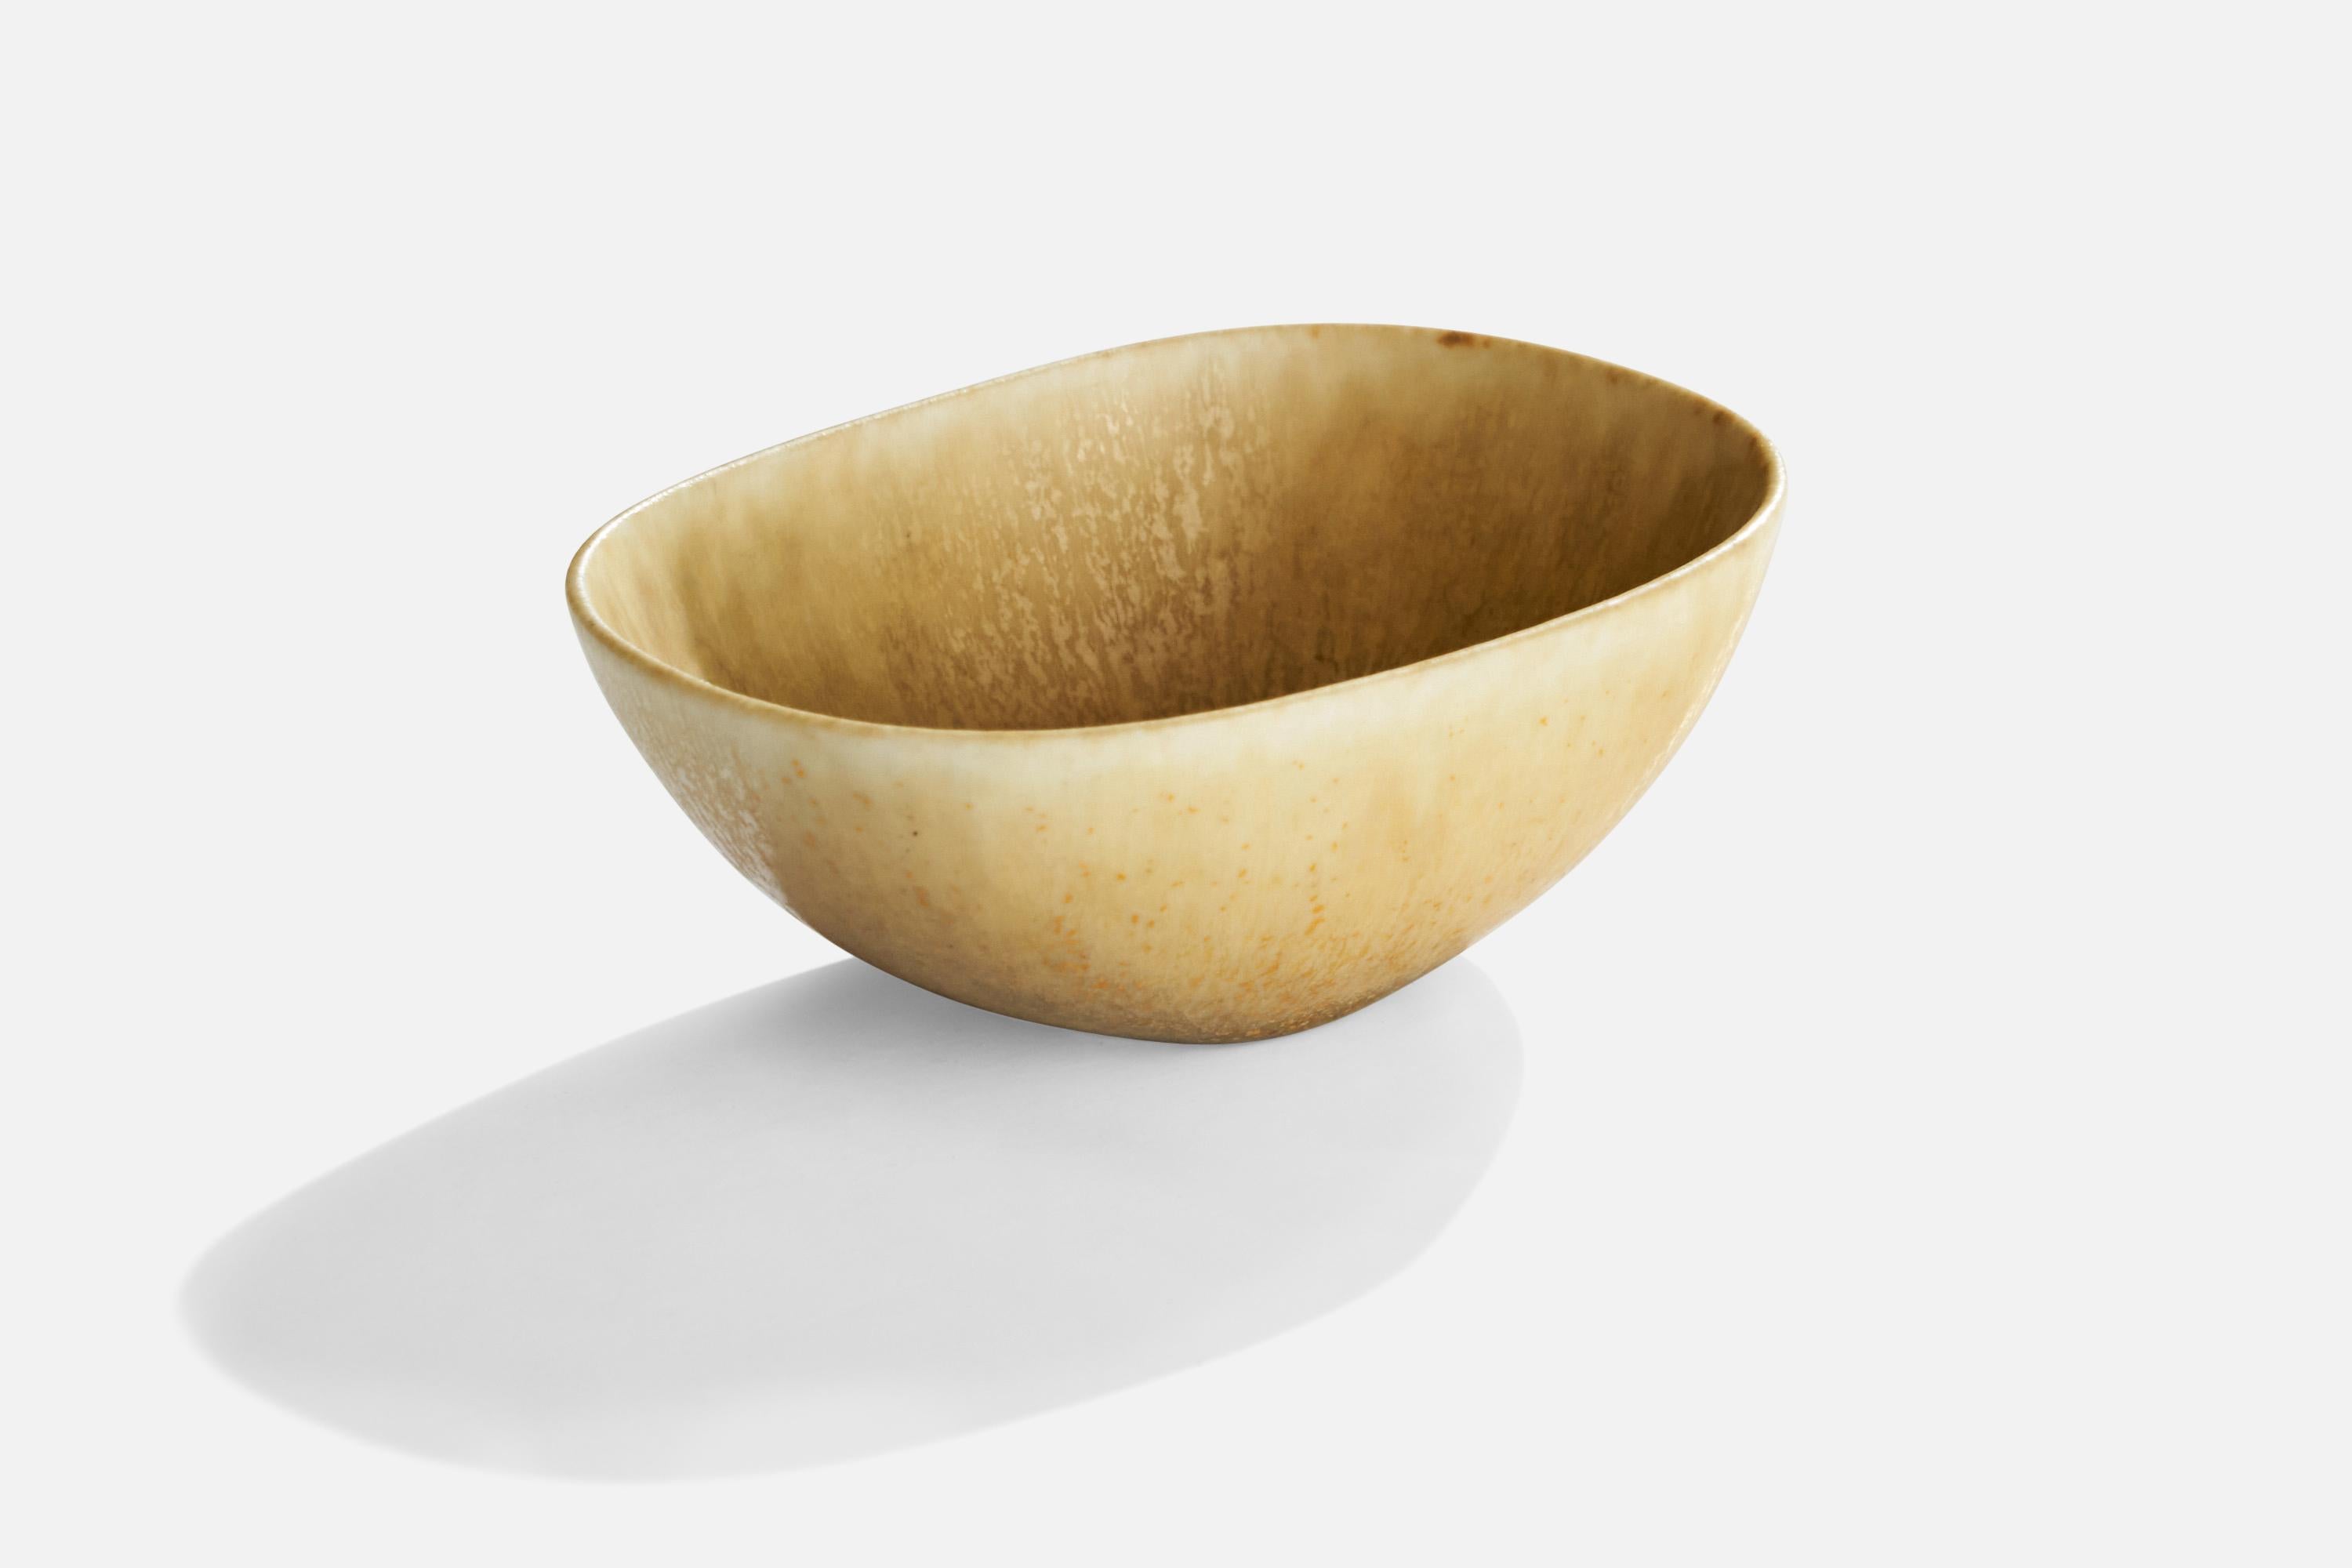 A small beige-glazed stoneware bowl designed by Carl-Harry Stålhane and produced by Rörstrand, Sweden, 1950s.